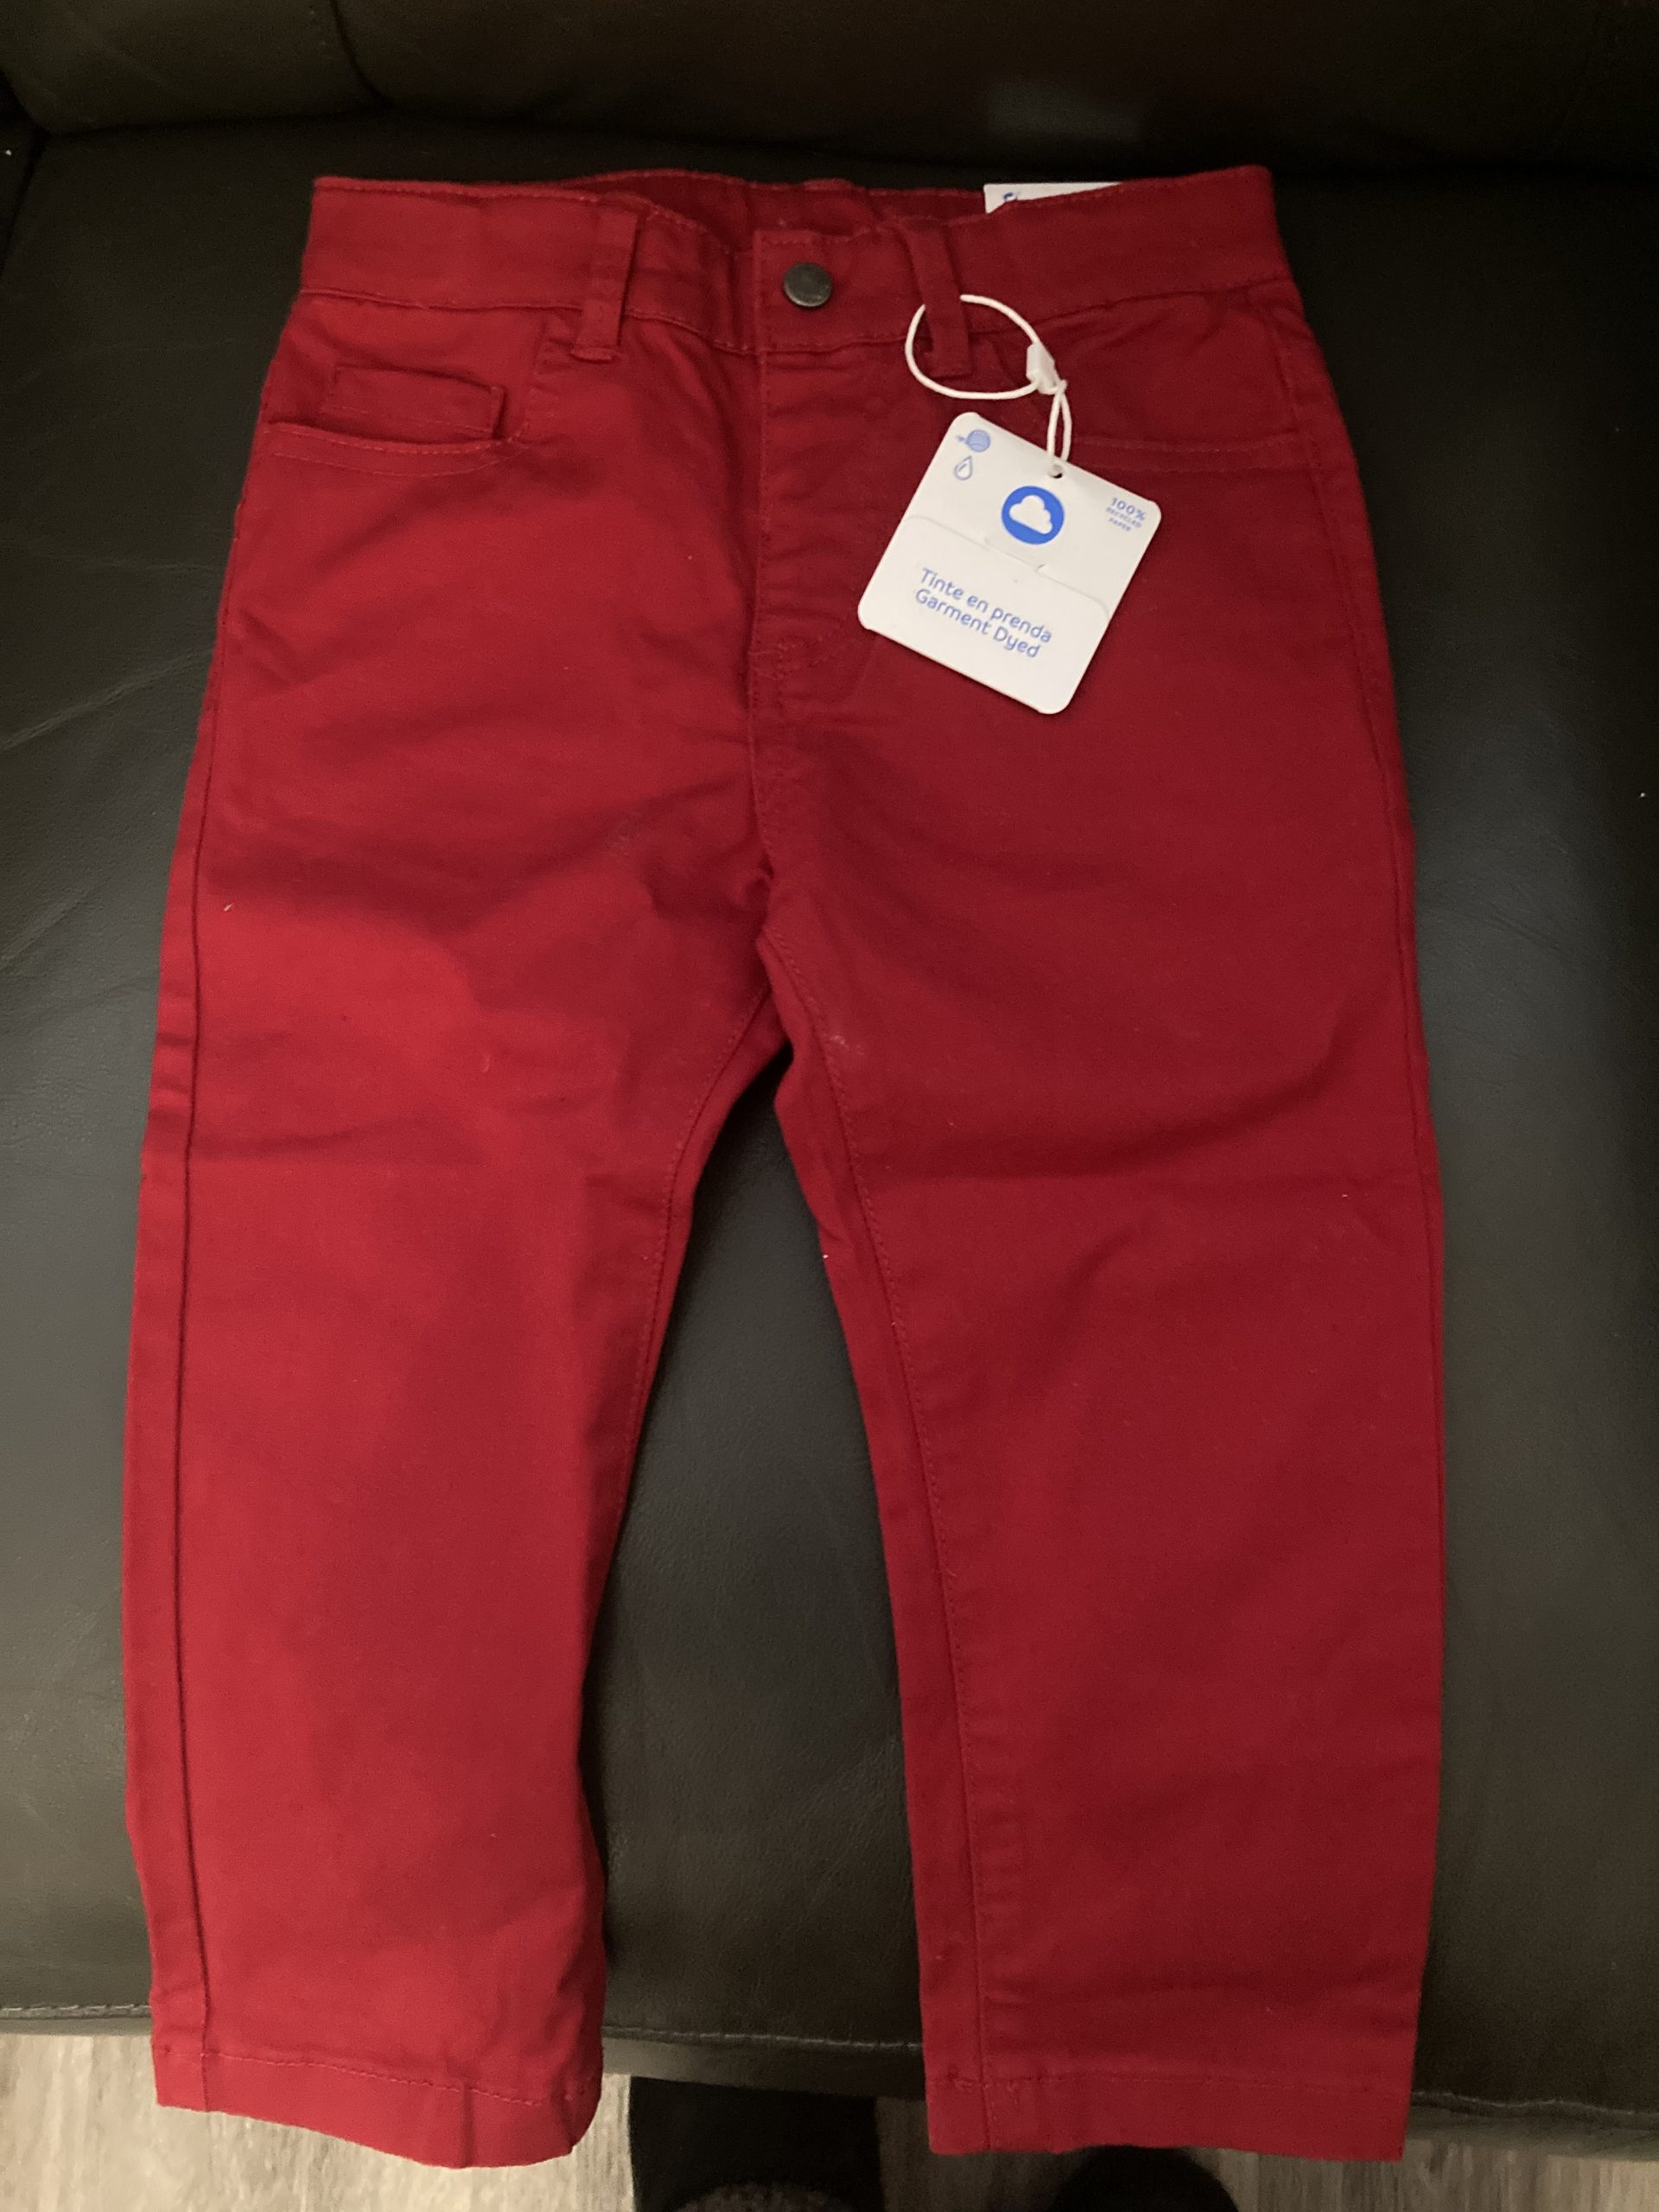 Mayoral long cotton pants red size 18 months